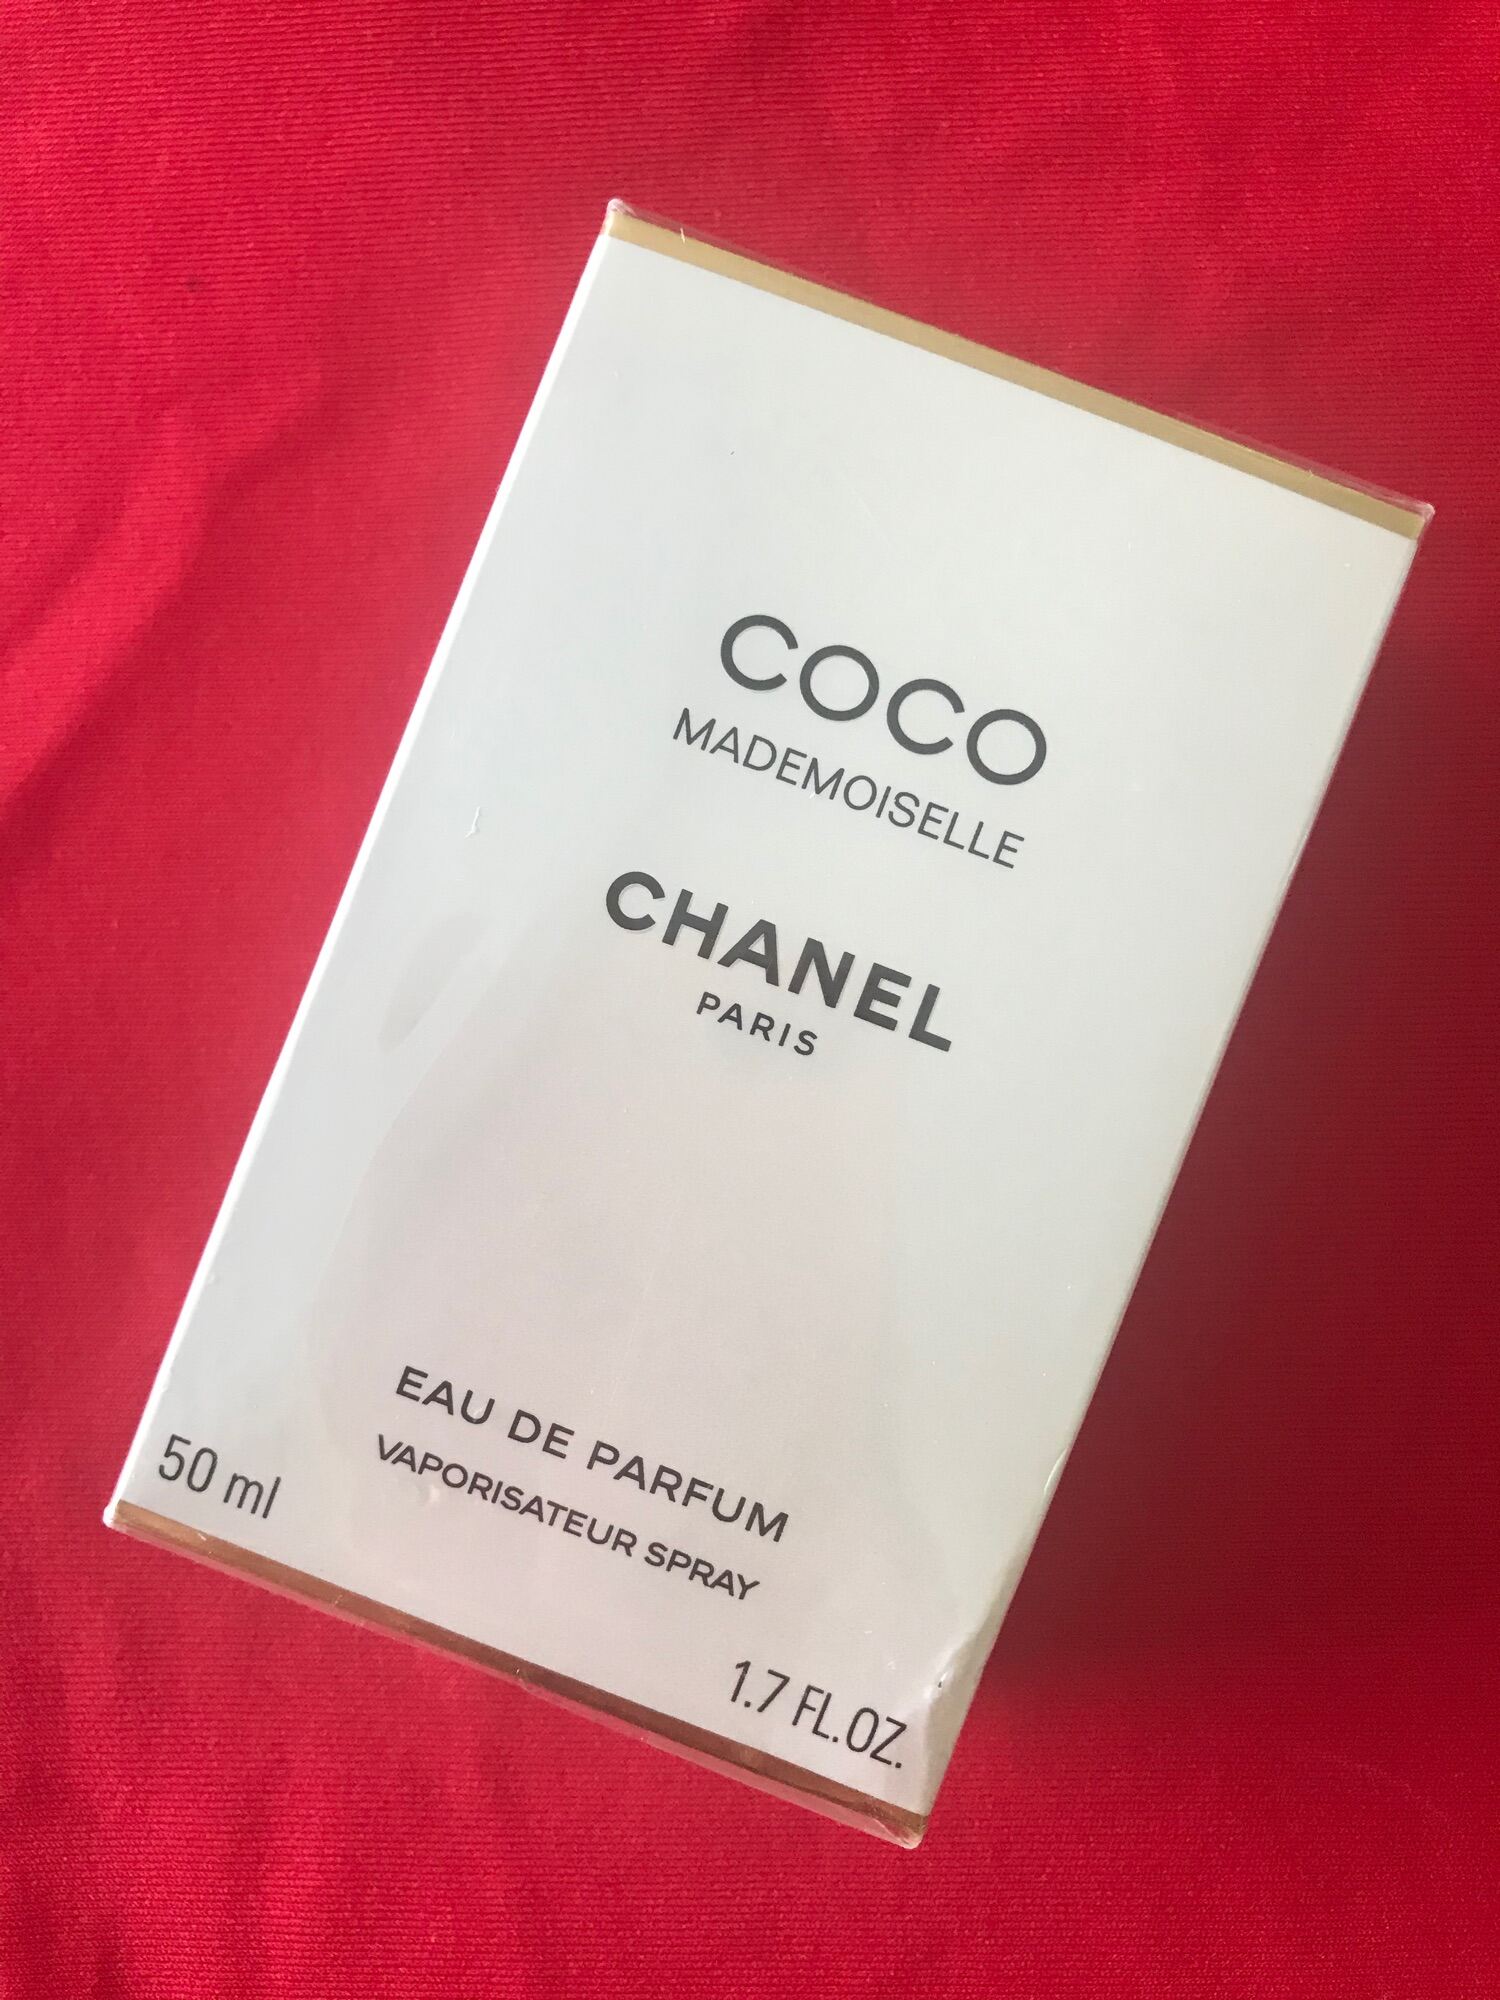 Chanel Coco Eau De Parfum 34oz Tester w Tester Box BRAND NEW 100  AUTHENTIC READY TO SHIP PERFUME for Sale in Philadelphia PA  OfferUp